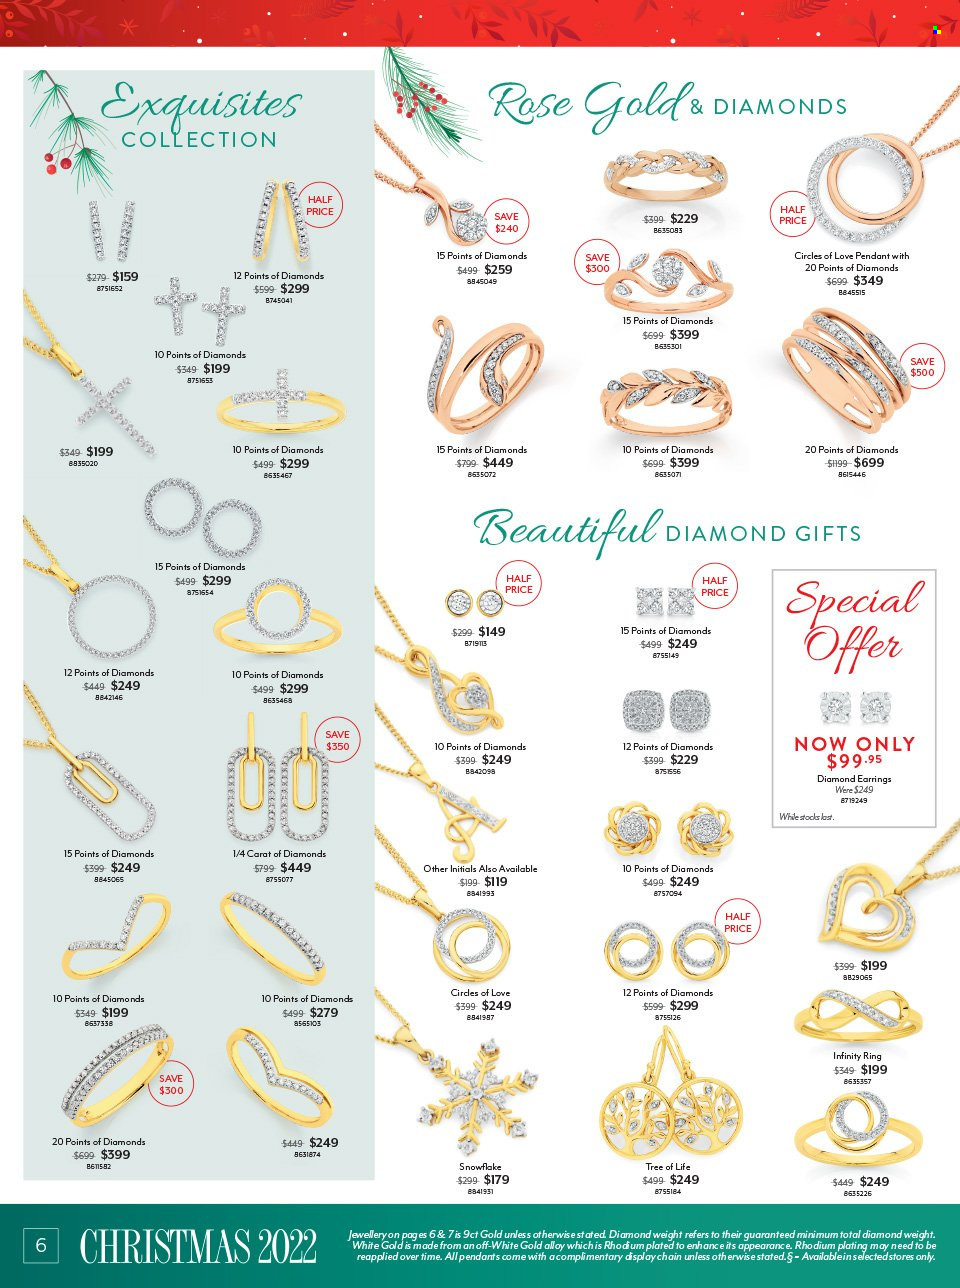 thumbnail - Angus & Coote Catalogue - 24 Oct 2022 - 24 Dec 2022 - Sales products - pendant, earrings, diamond earrings. Page 6.